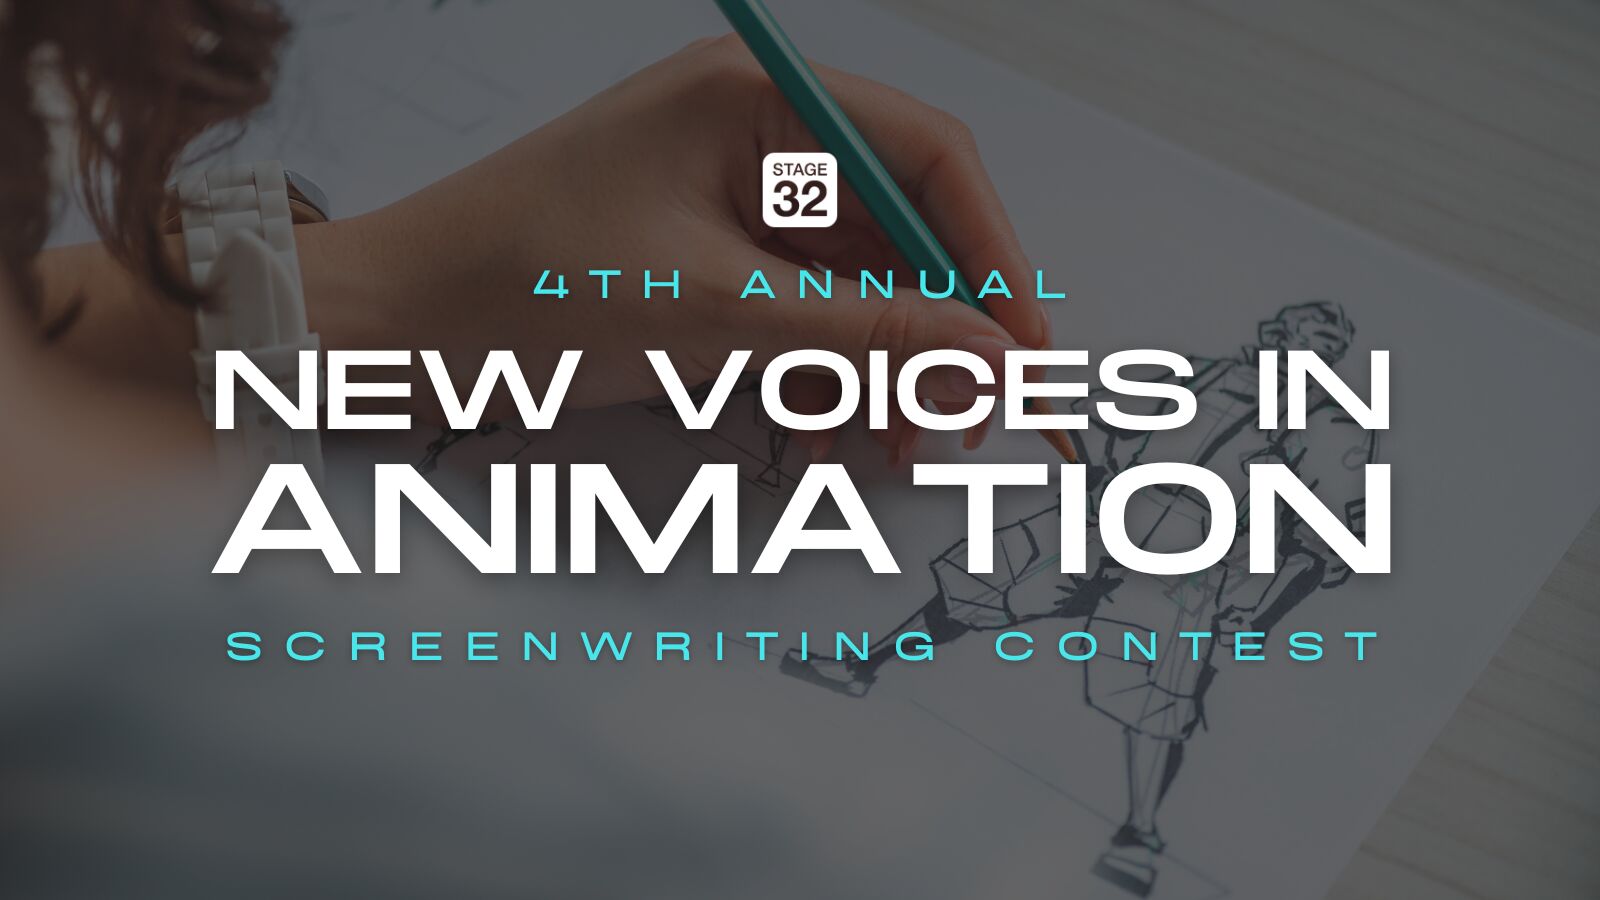 4th Annual New Voices in Animation Screenwriting Contest